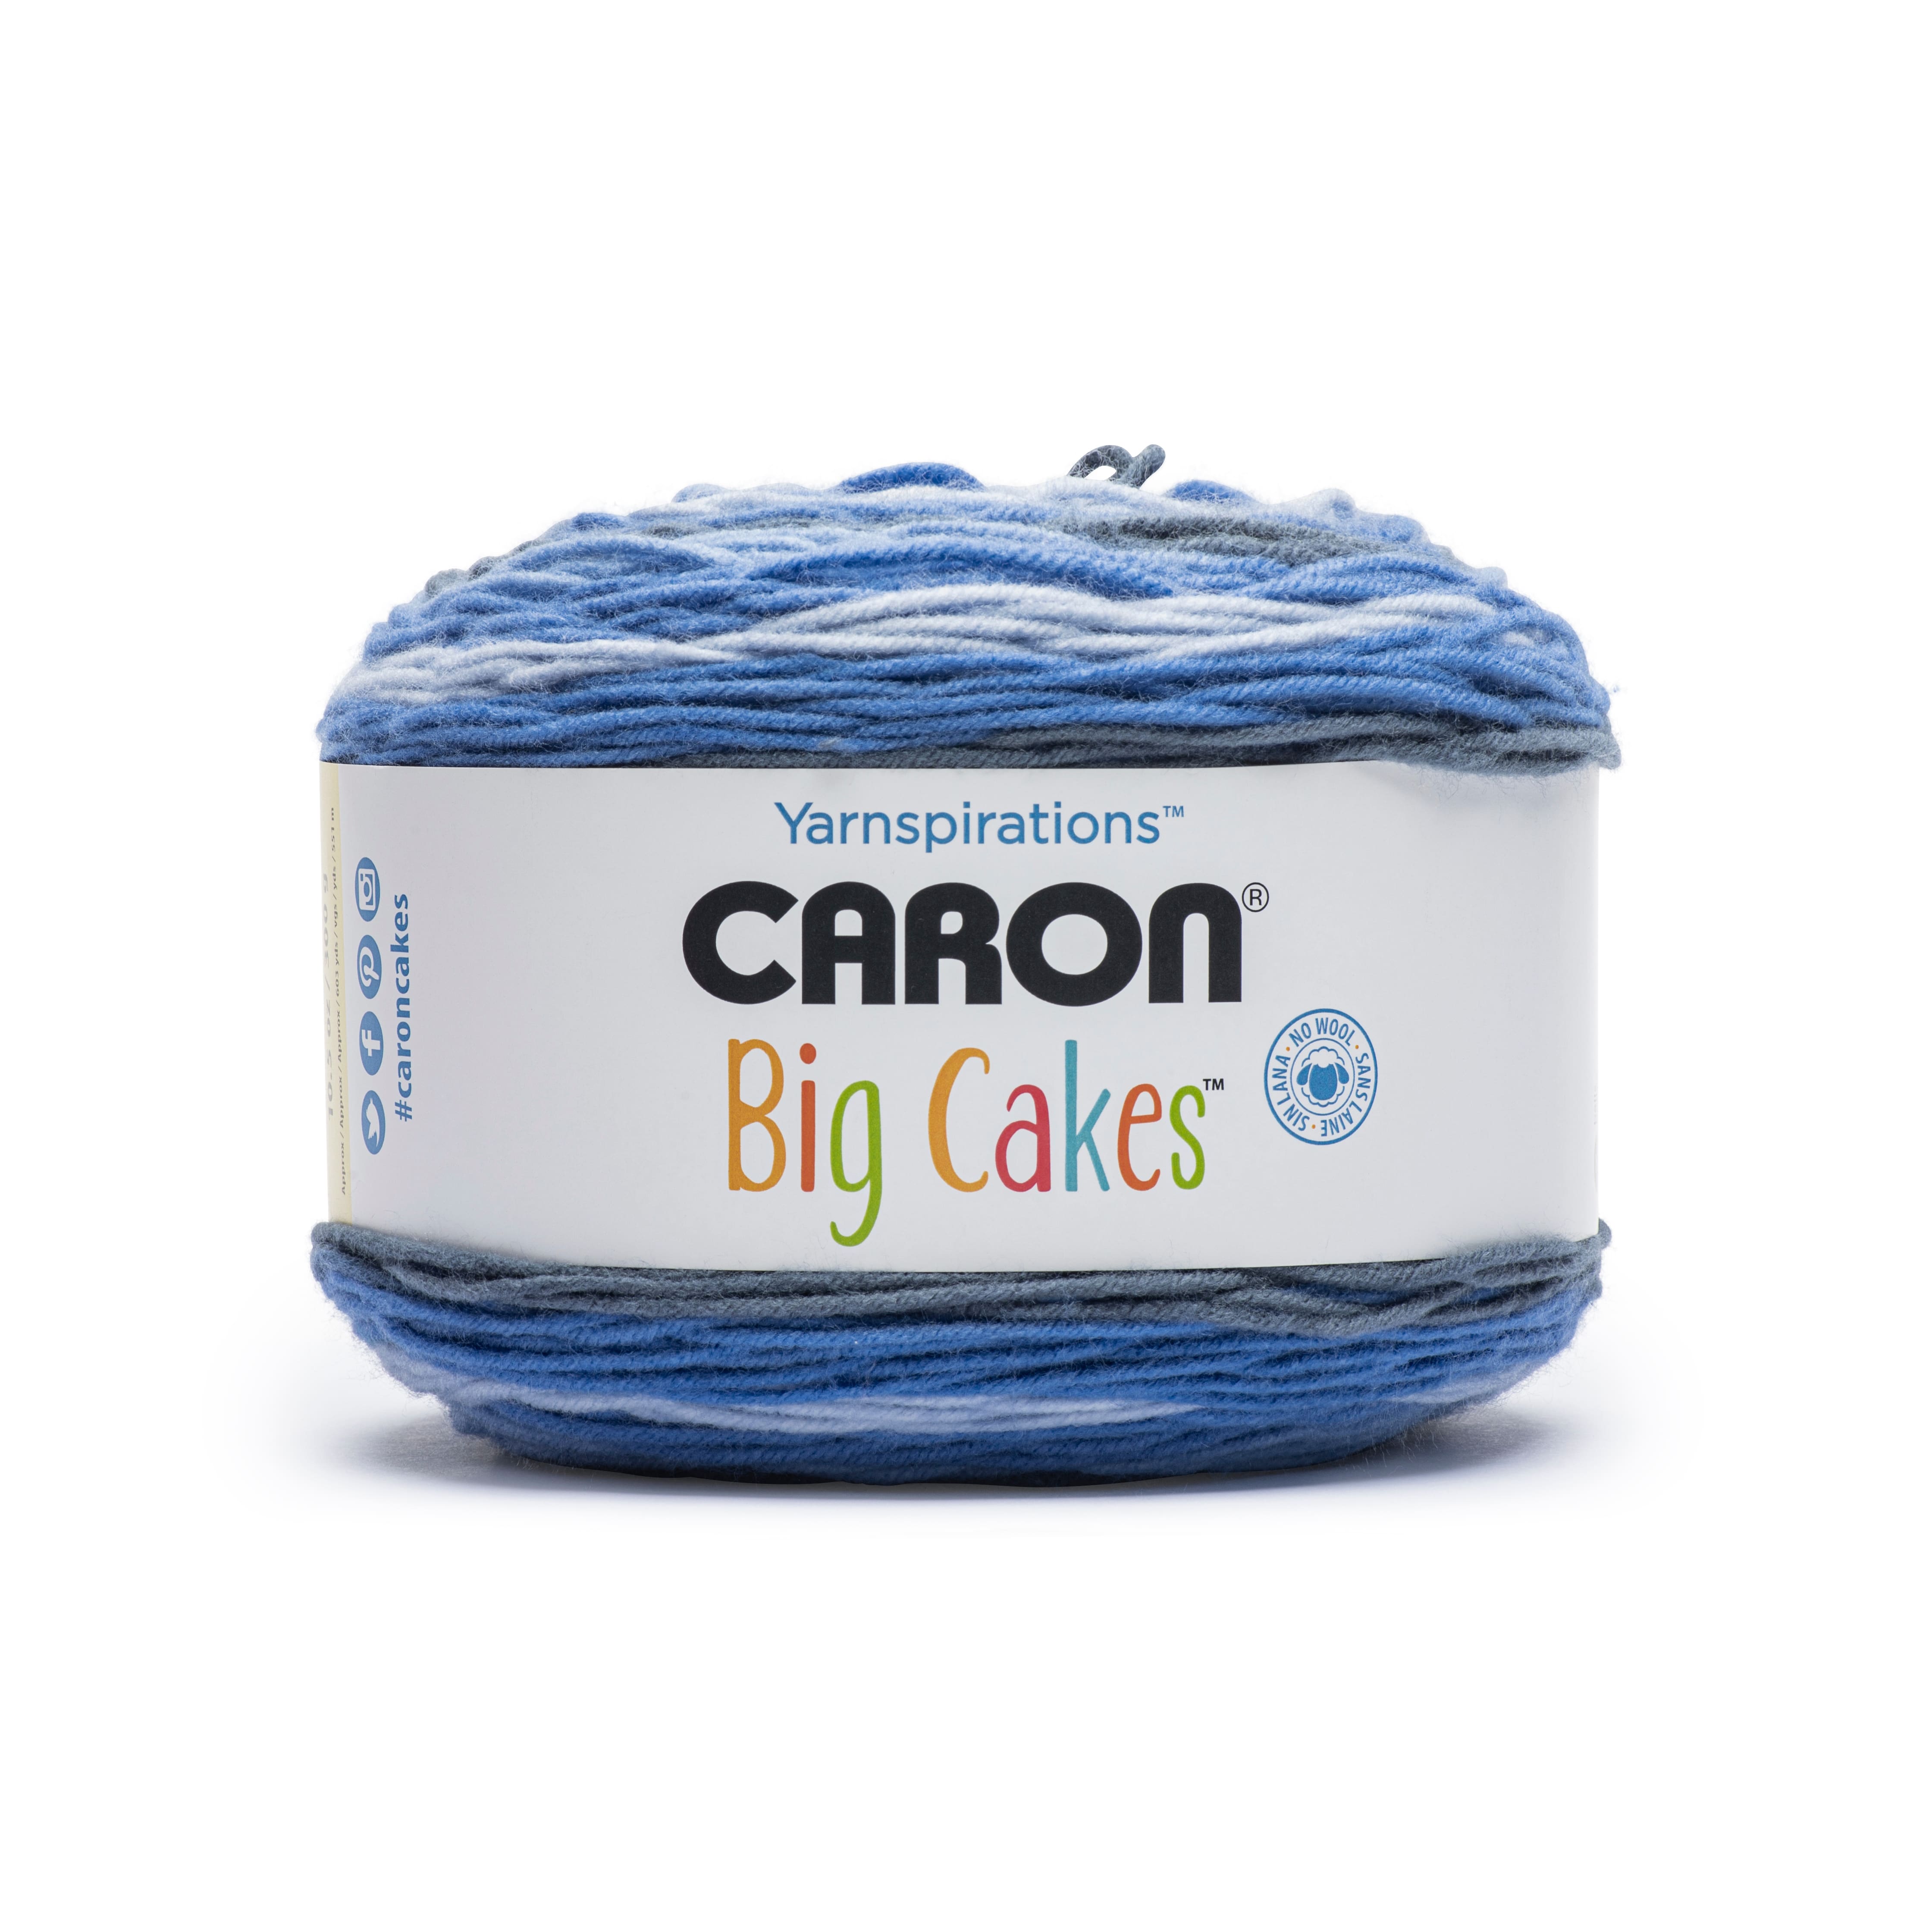 Big Cakes Yarn by Caron - Multicolor Yarn for Knitting, Crochet, Weaving,  Arts & Crafts - Toffee Brickle, Bulk 12 Pack